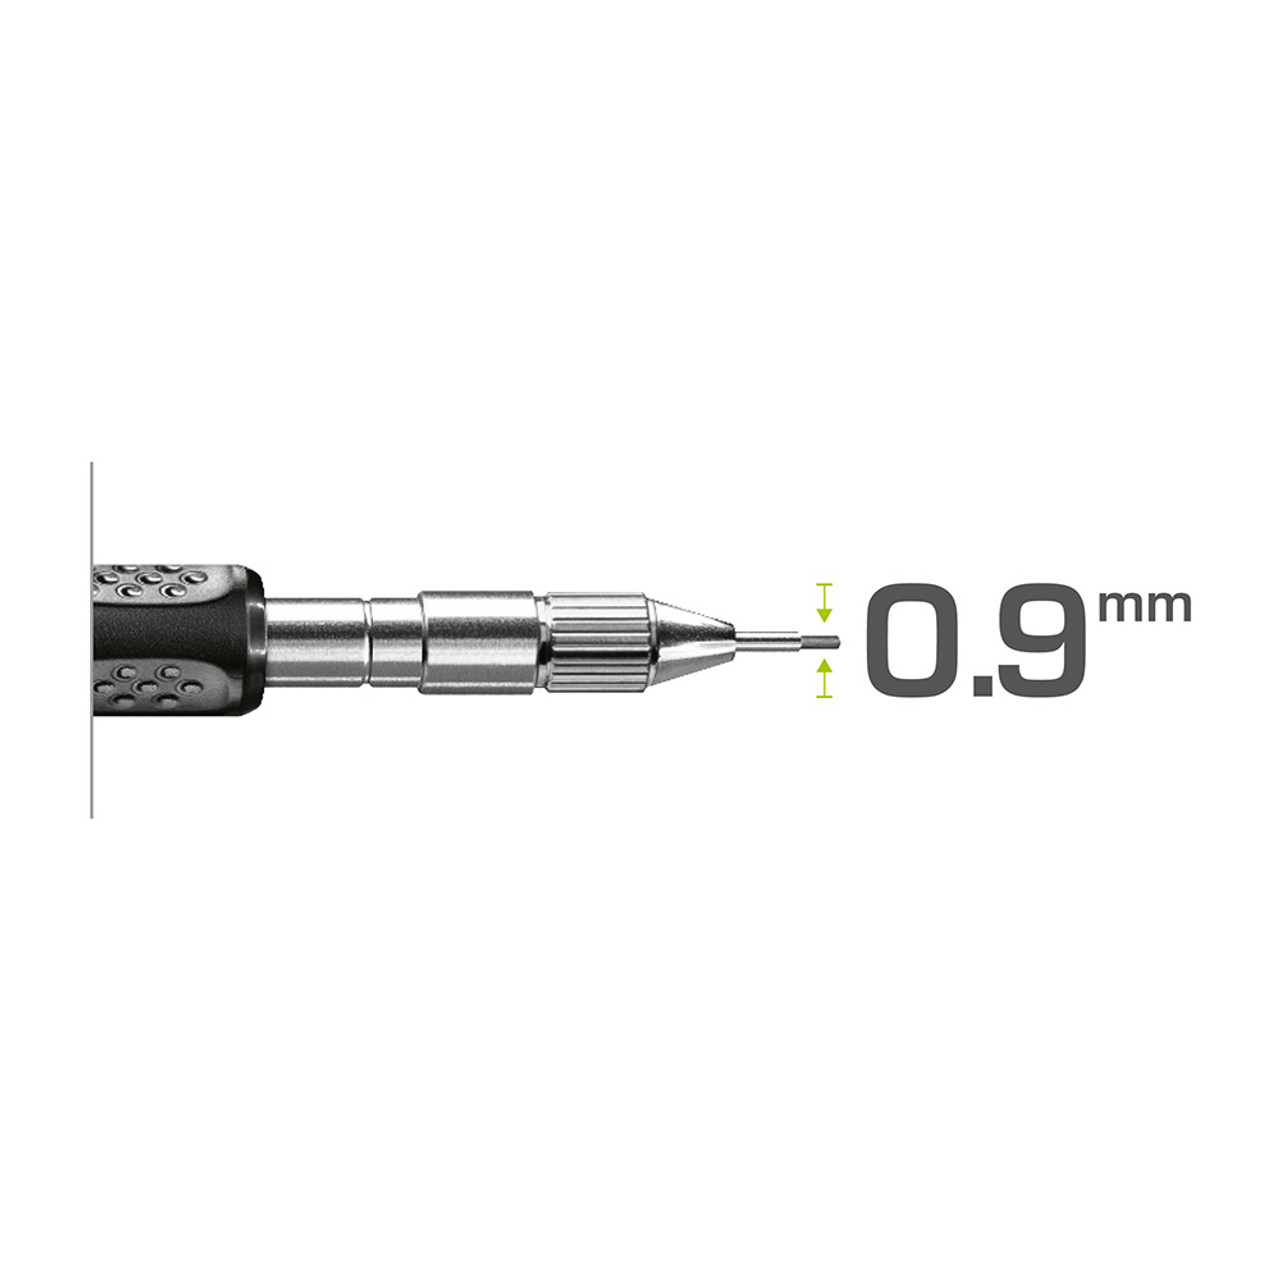 NEW Pica 7070 .9 mm Pencil / Pica 3030 Housing with the Finer Pentel  Graphgear Lead #tools #pica 